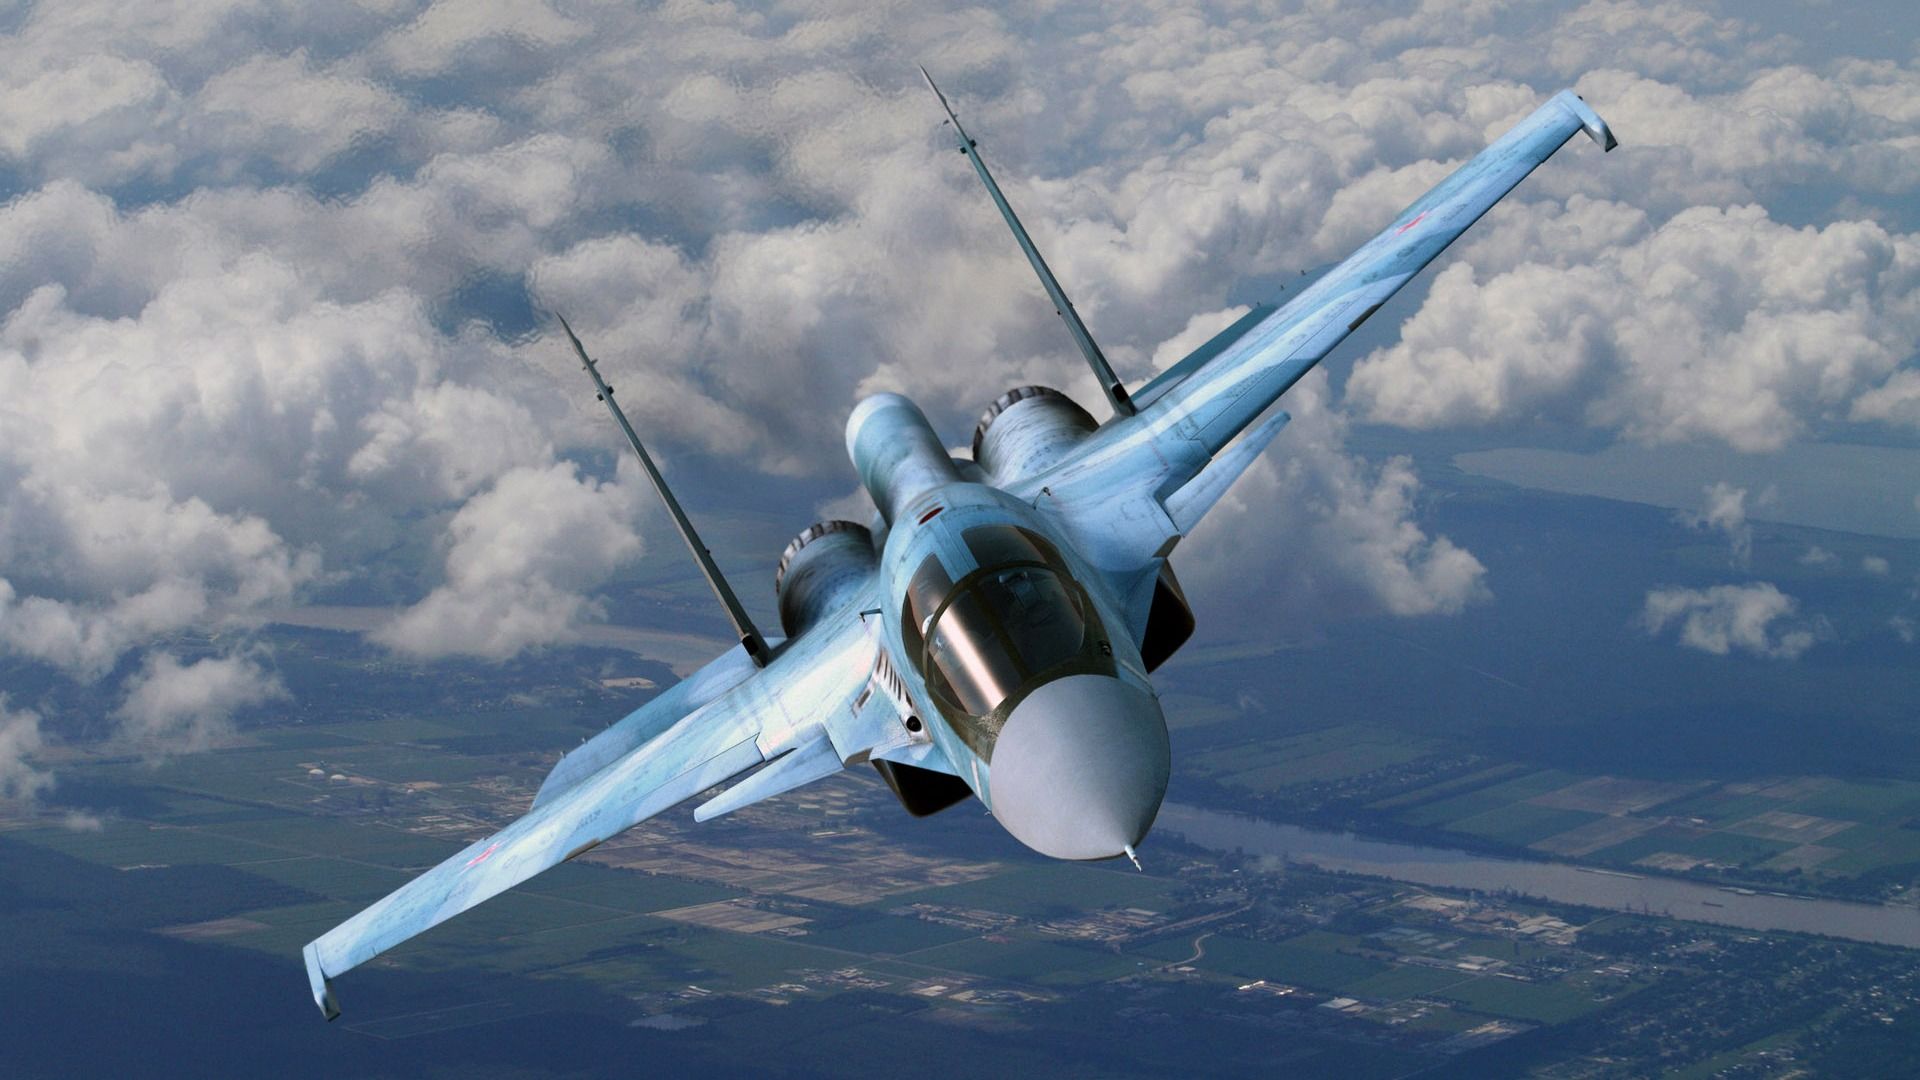 Su 35 Flanker E Wallpaper Military Aircrafts Planes Wallpaper in jpg format for free download